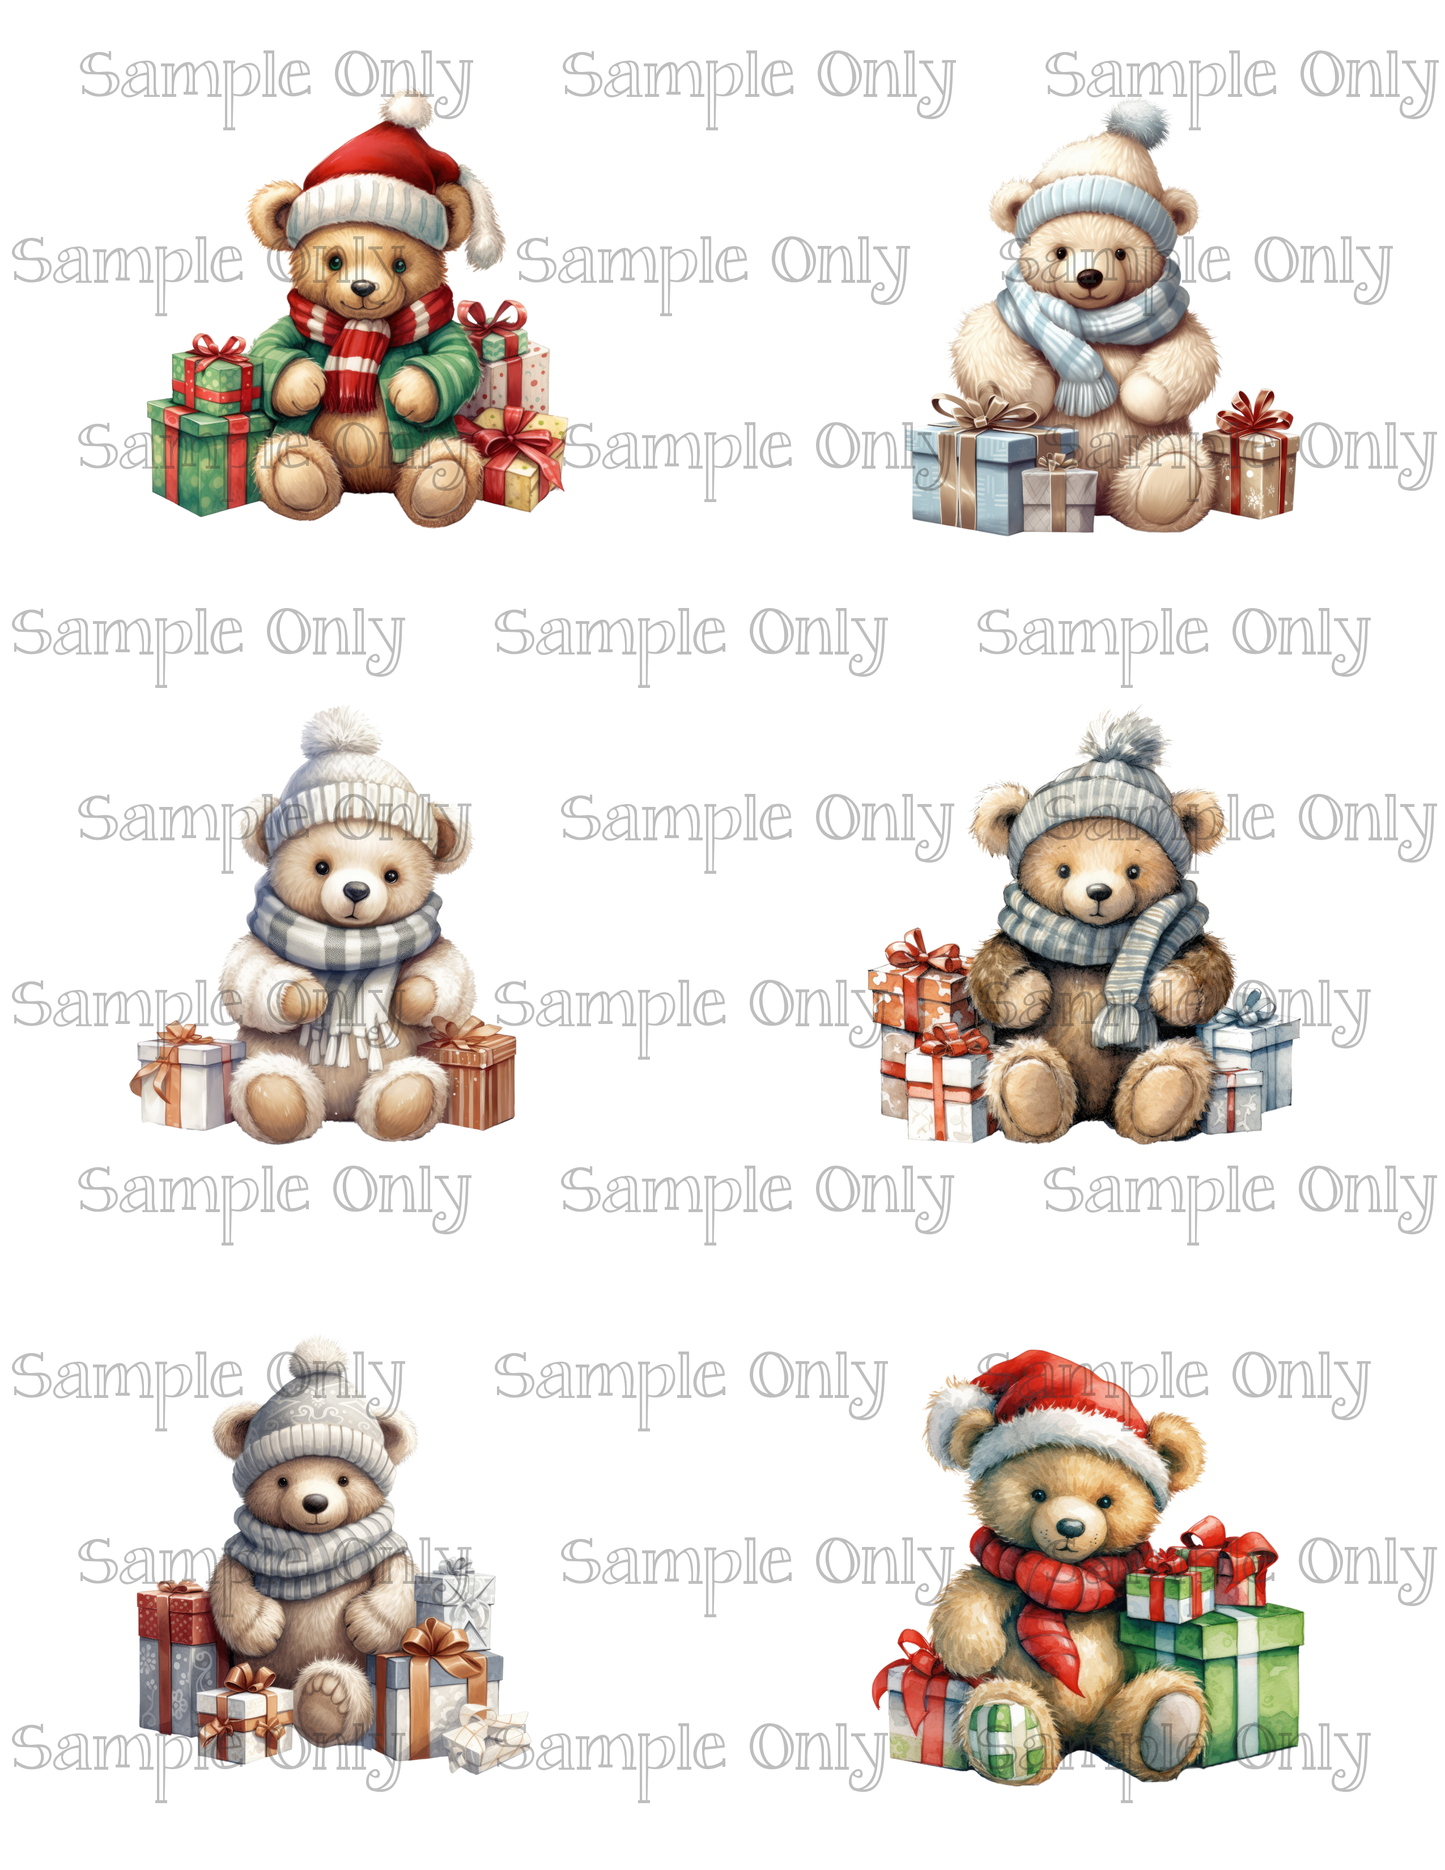 2.5 Inch Teddy Bear 02 Image Sheet For Polymer Clay Transfer Decal DIGITAL FILE OR PRINTED